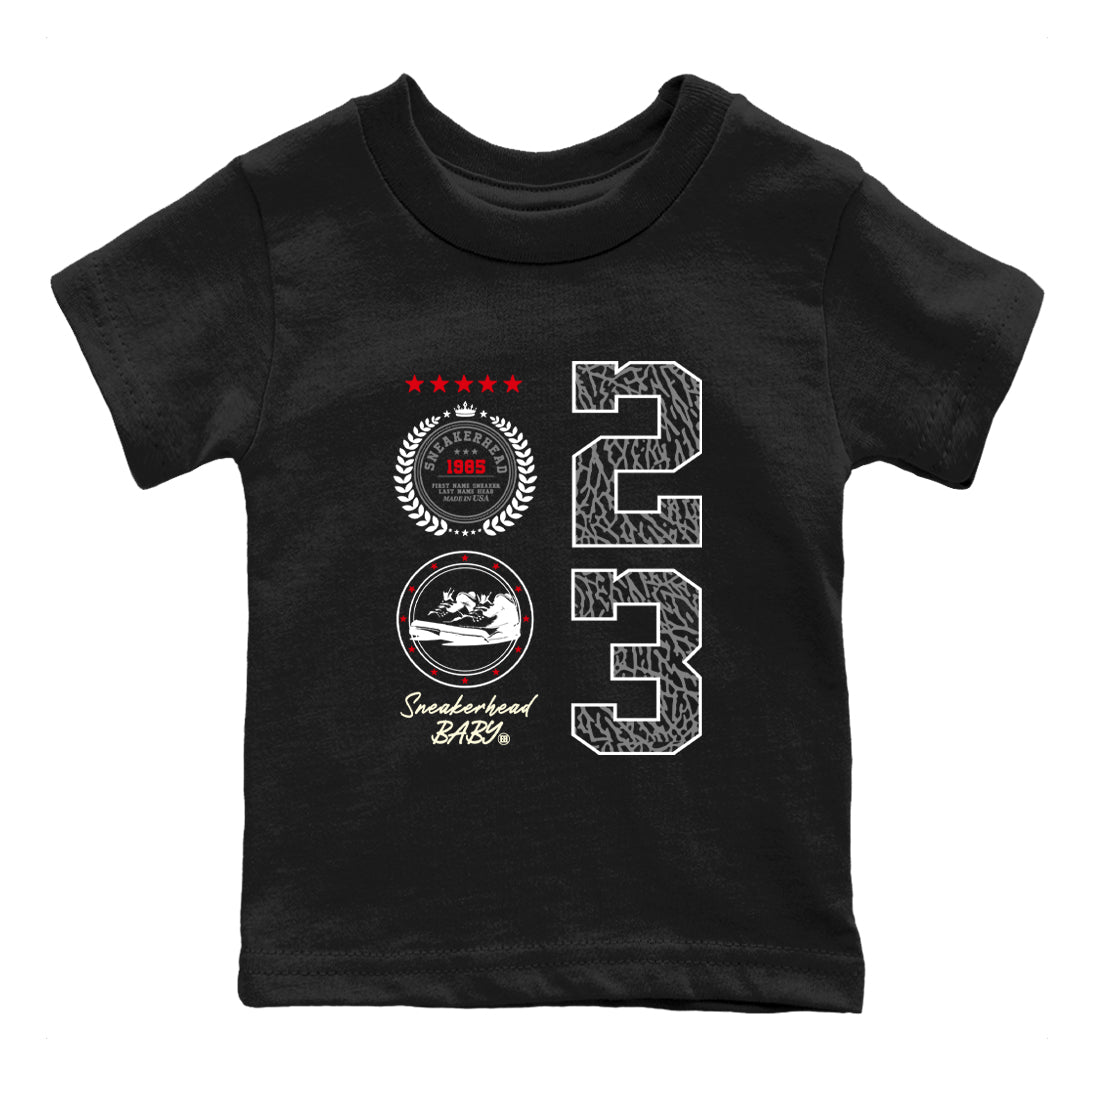 Air Jordan 3 Retro Cement Grey shirts to match jordans Sneaker Emblem sneaker match tees 3s Cement Grey SNRT Sneaker Tees streetwear brand Baby and Youth Black 2 cotton tee